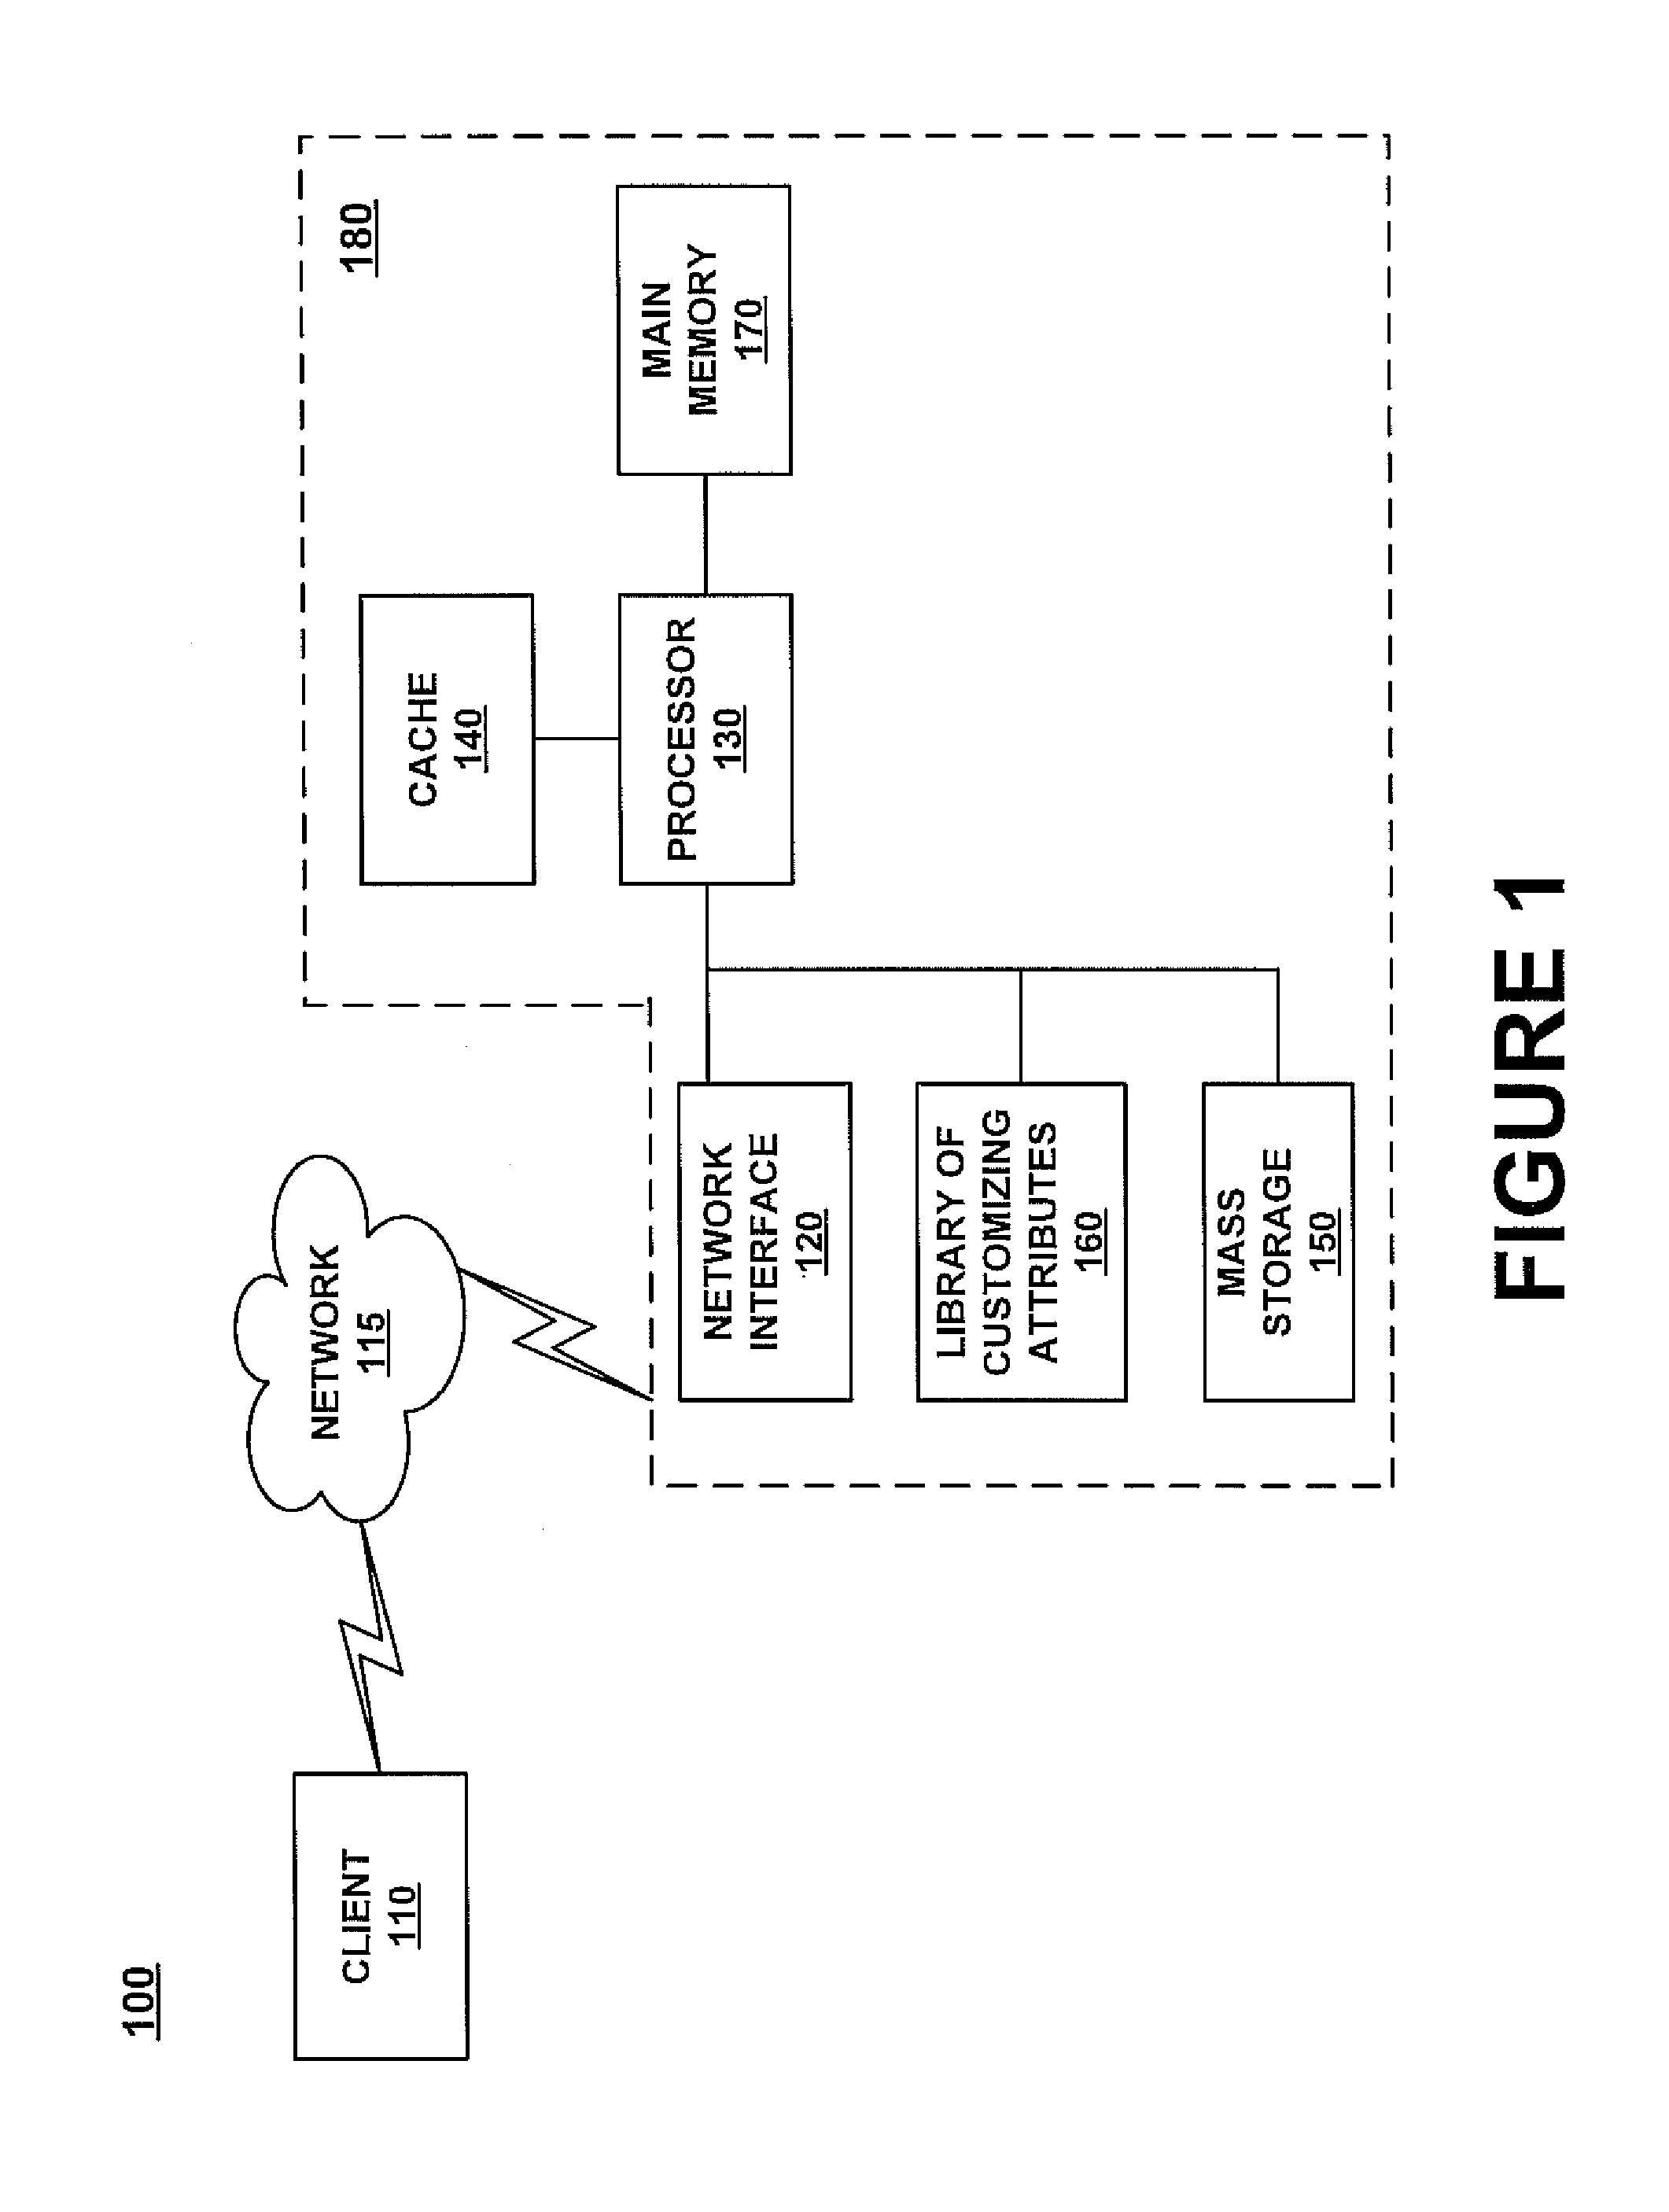 Method and system for customizing content on a server for rendering on a wireless device